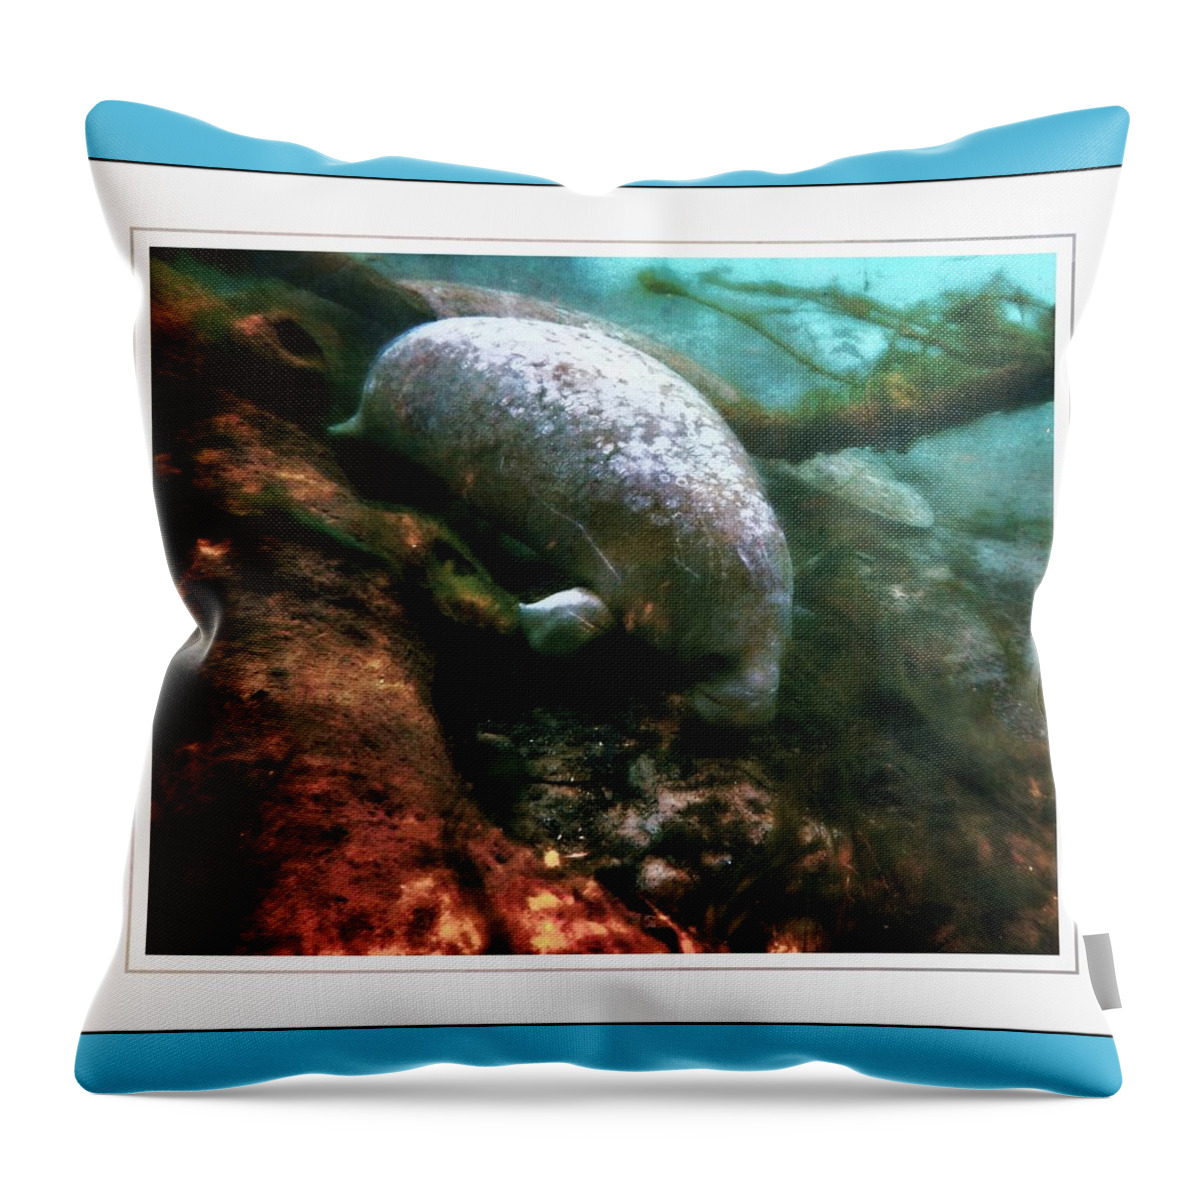 Manatee Family 1 Throw Pillow featuring the photograph Little White Manatee by Sheri McLeroy